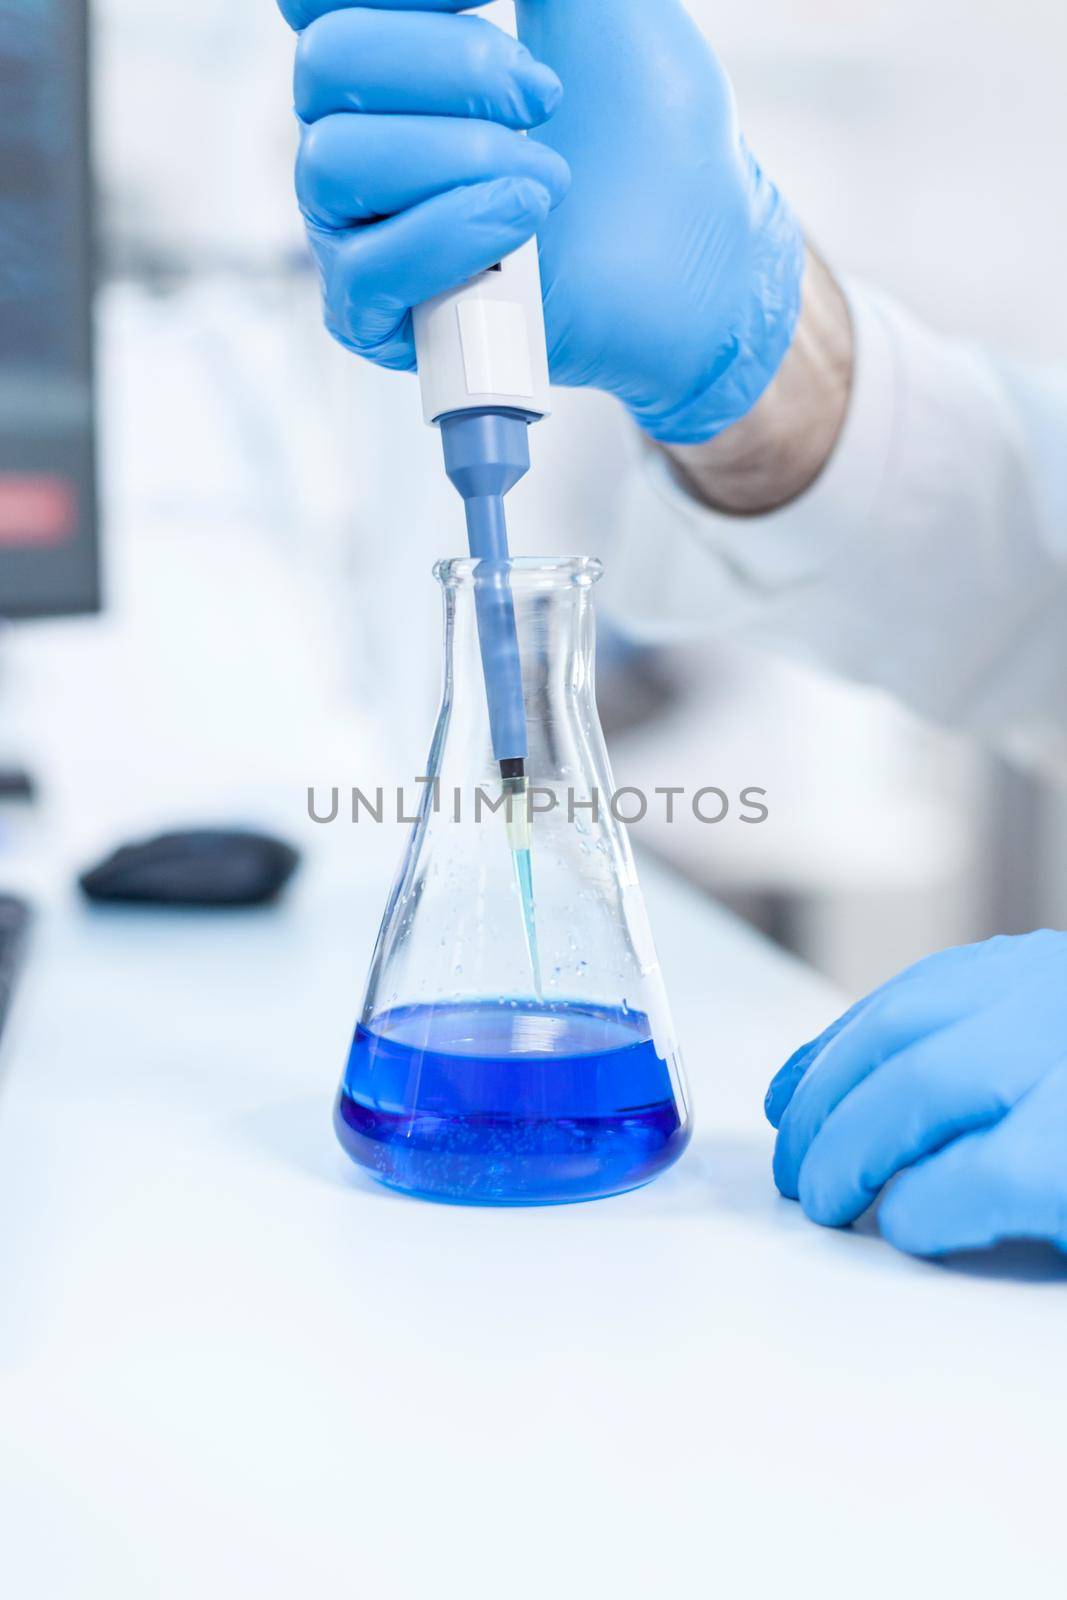 Scientist holding dispenser on test tubes in clinic pharmacy and medical research laboratory. Senior professional chemist using pippete with blue solution for microbiology tests.